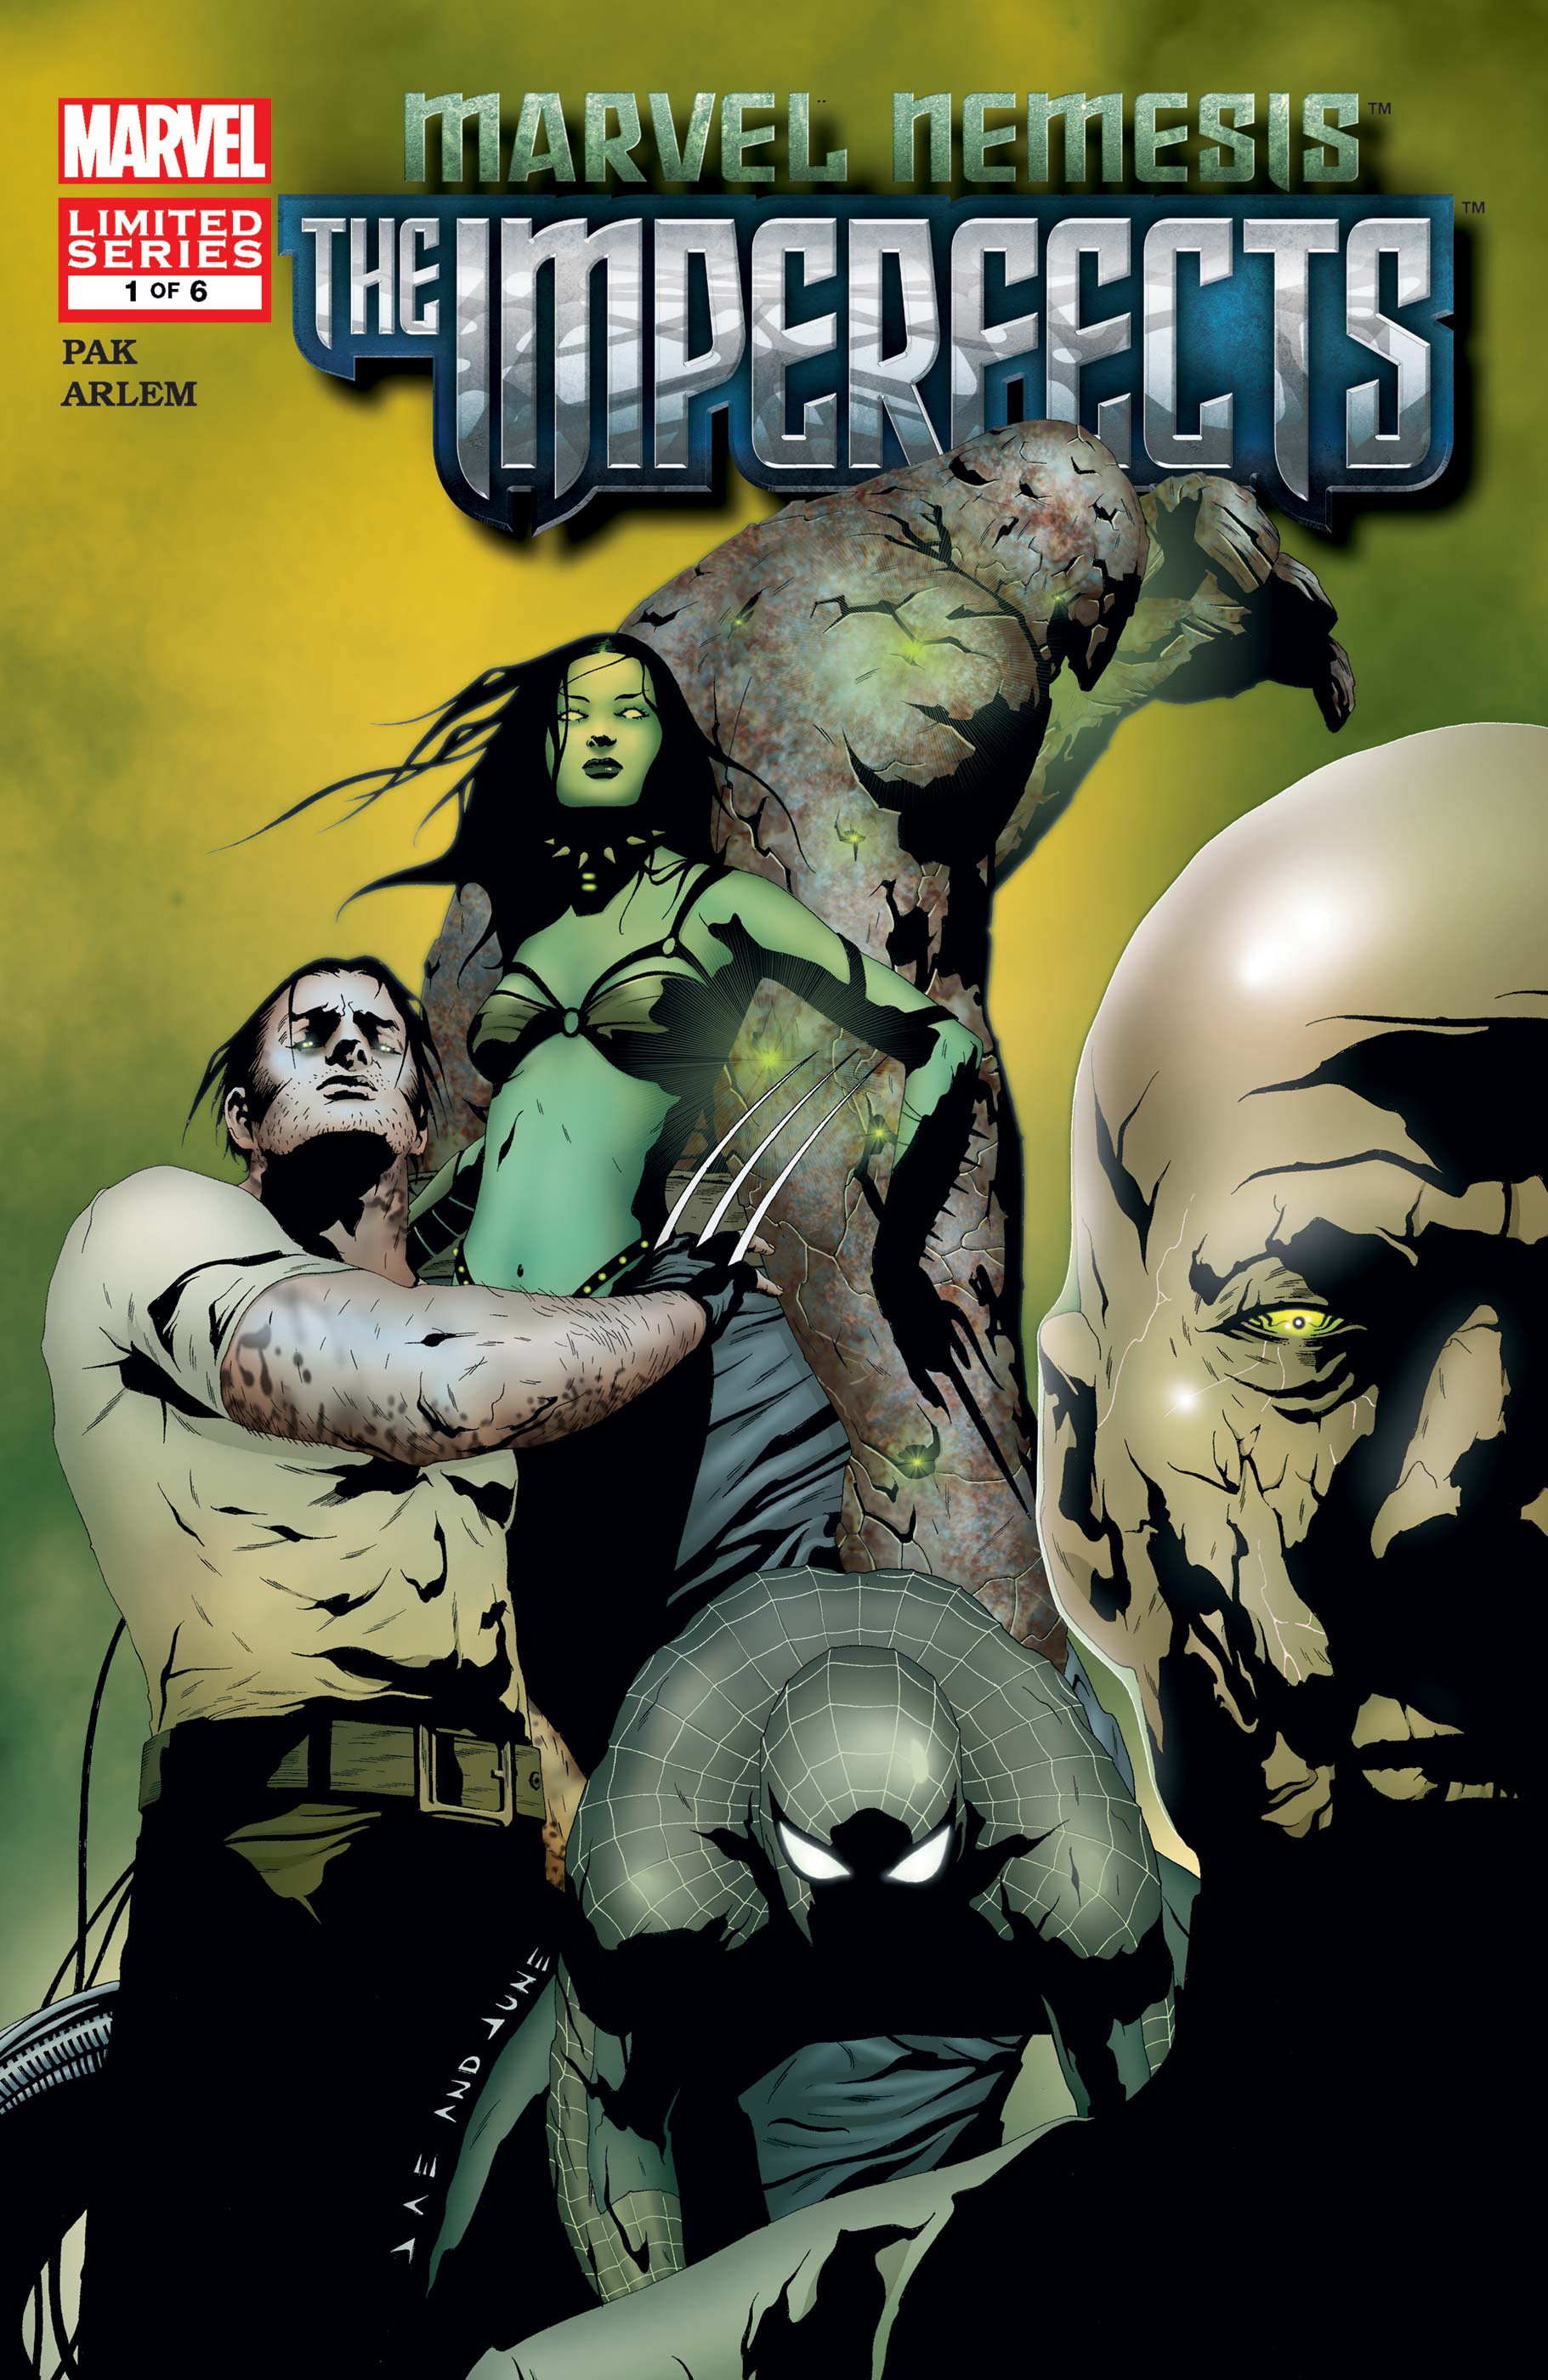 Marvel Nemesis: The Imperfects (2005) #1